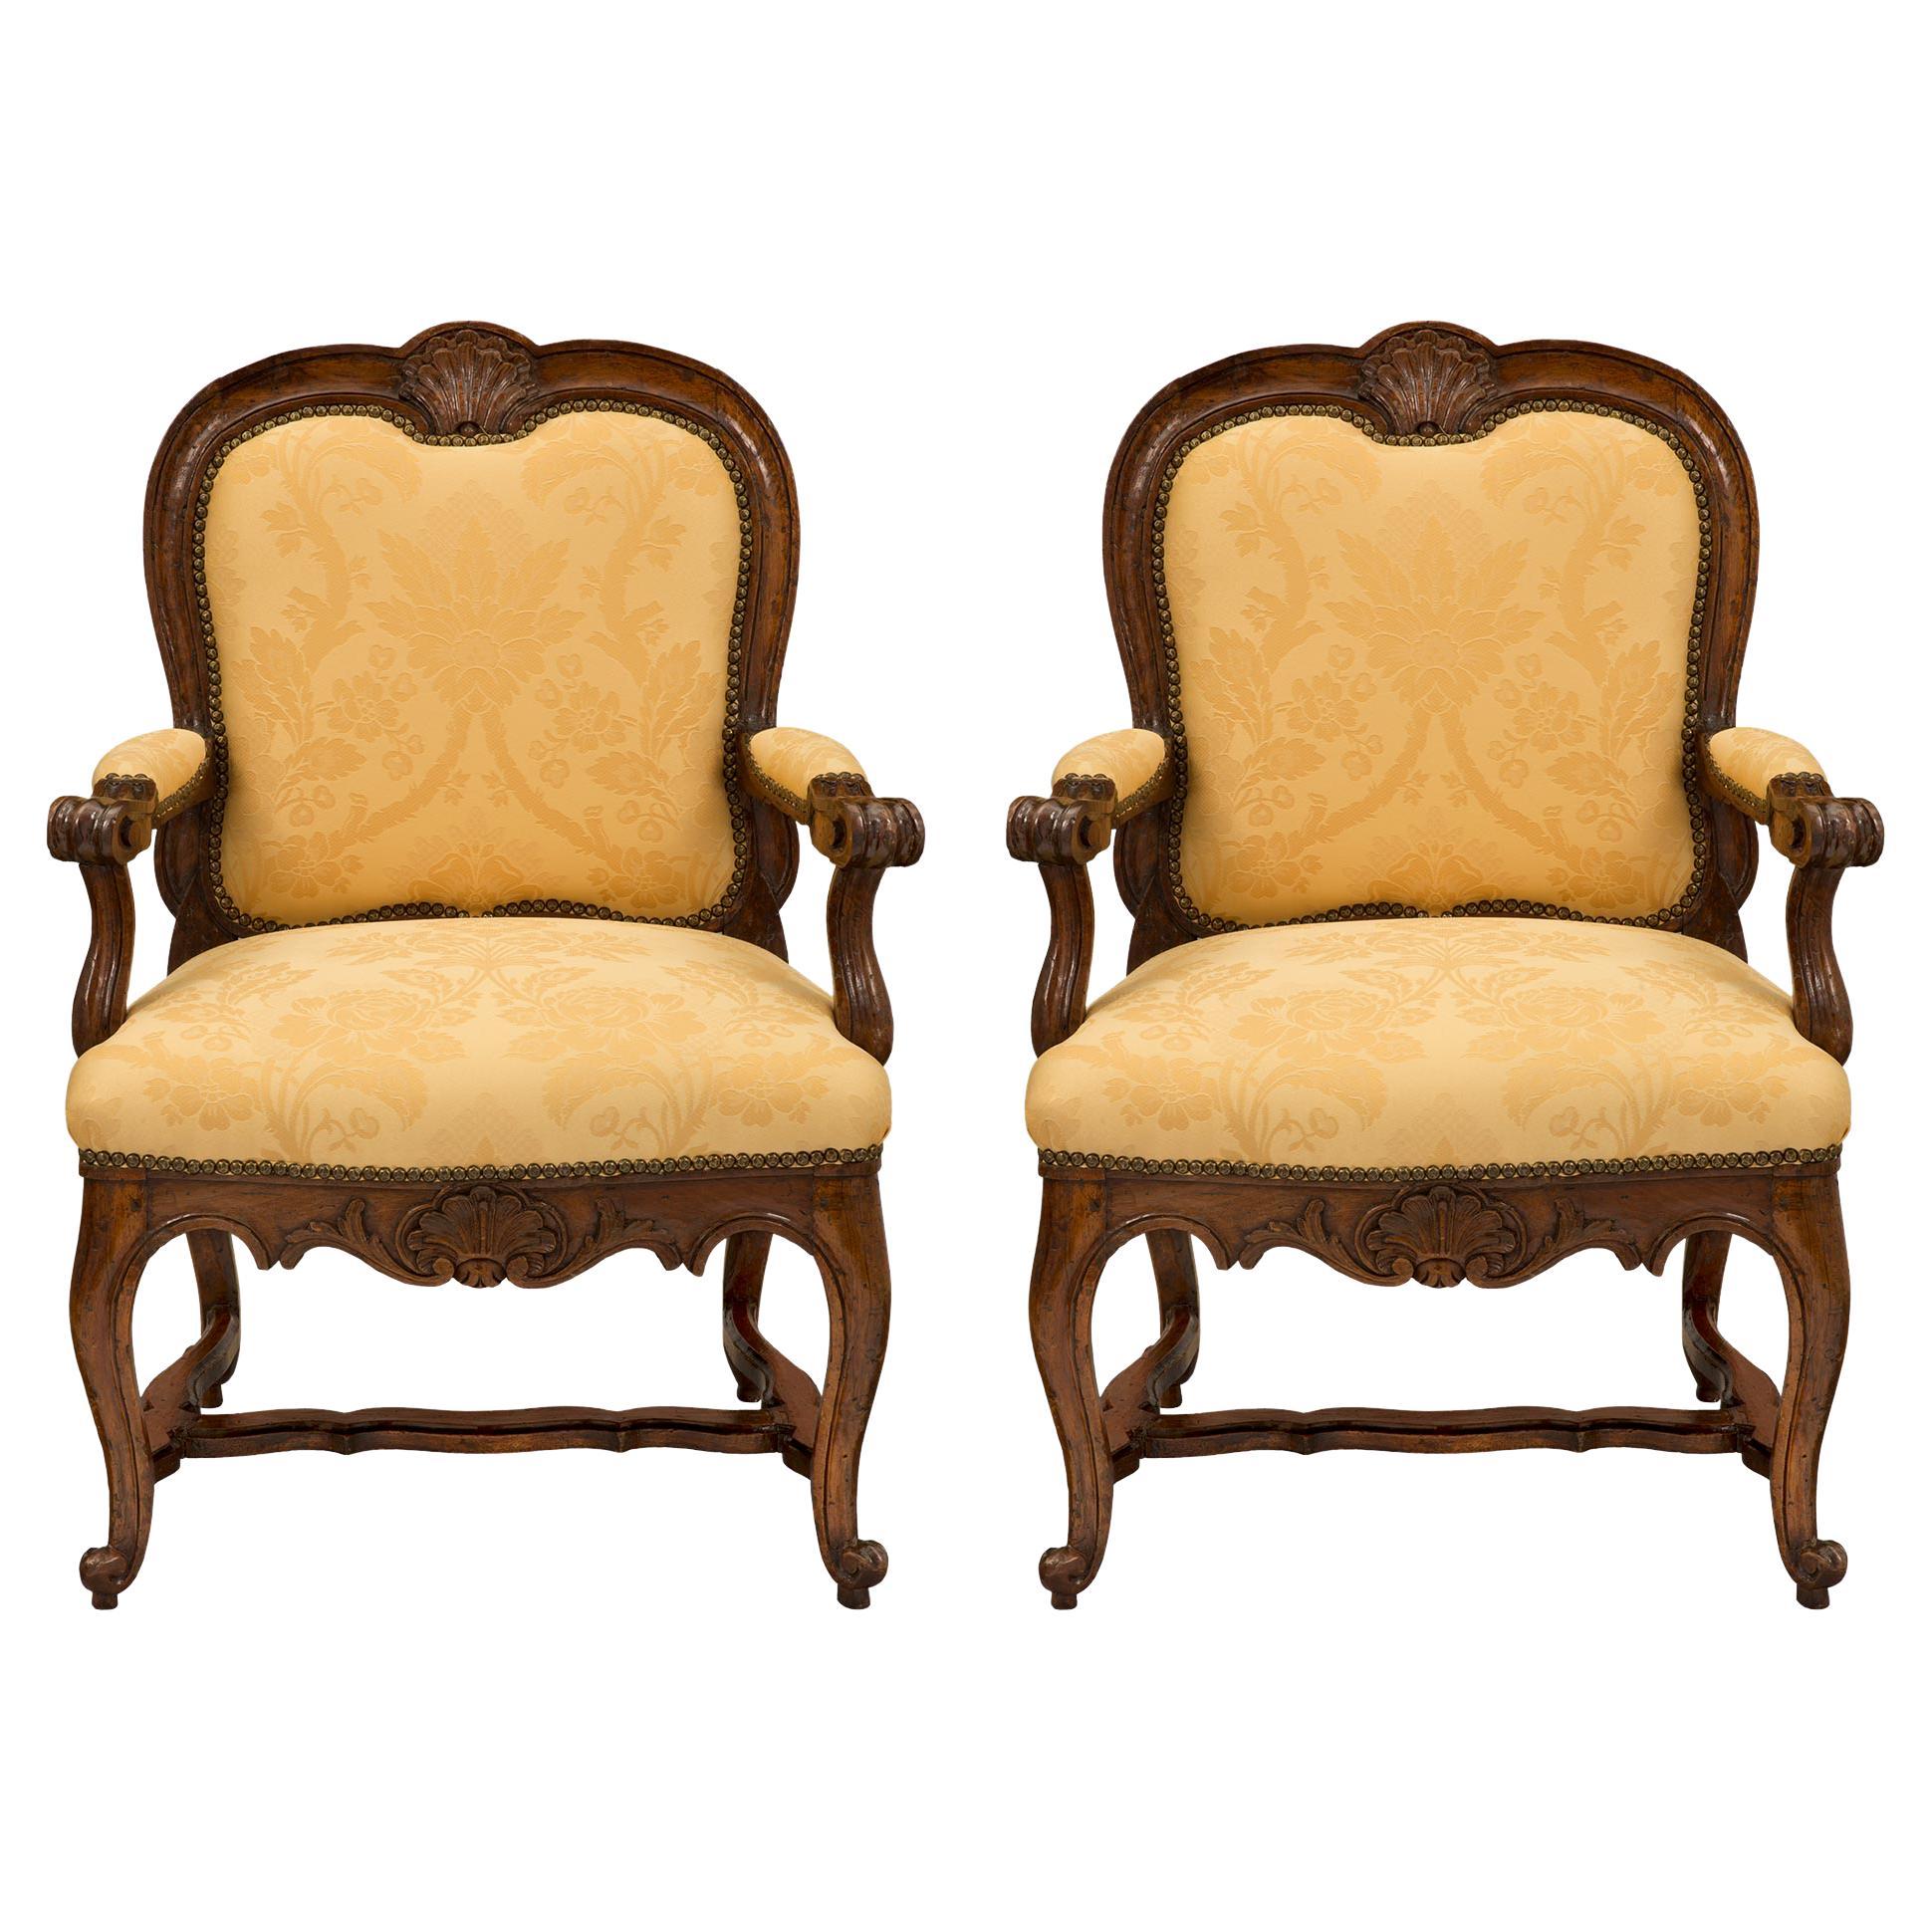 Pair of Italian 18th Century Carved Walnut Armchairs For Sale